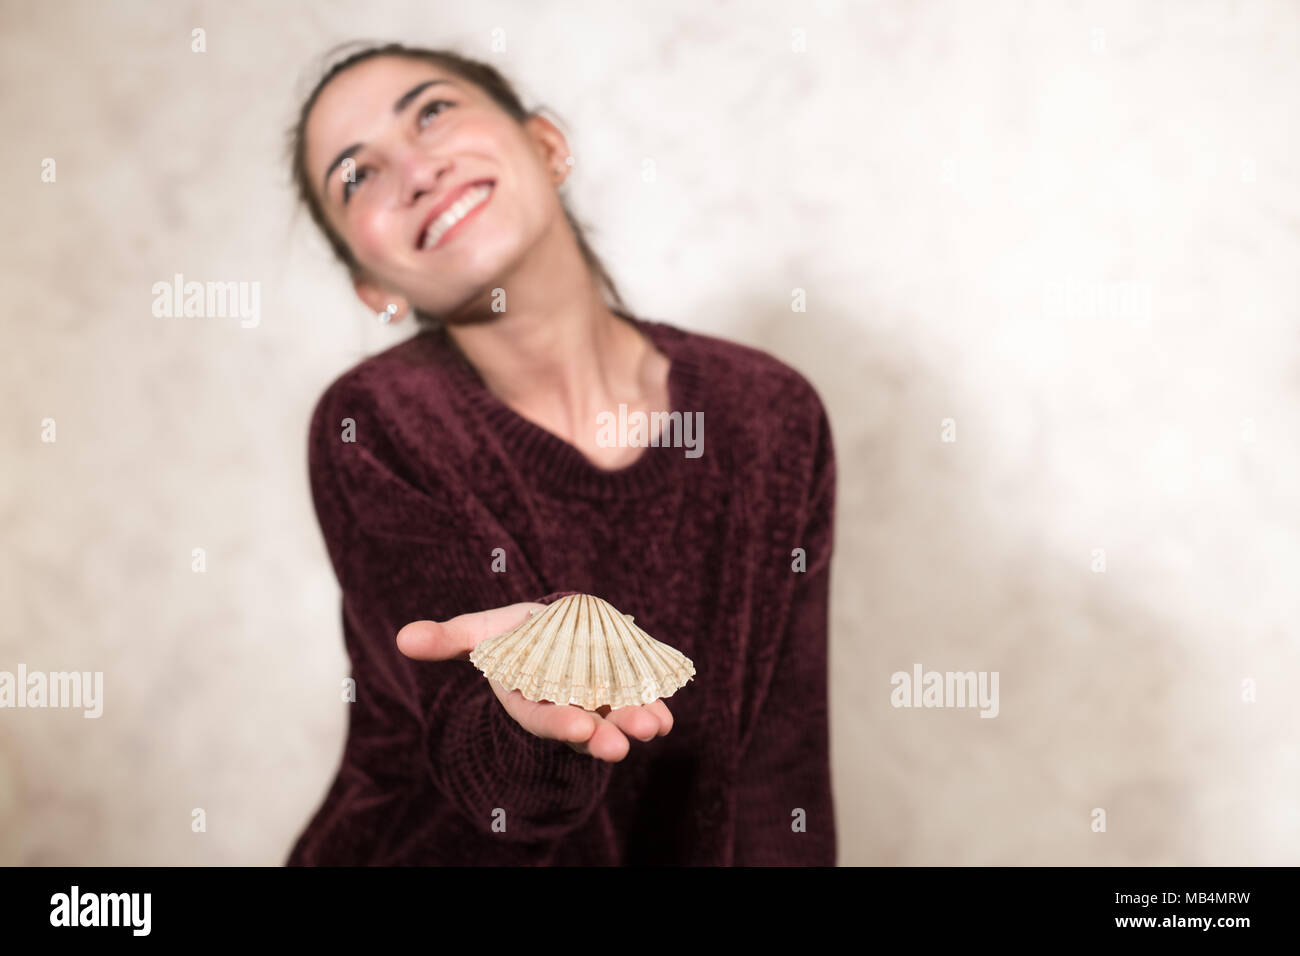 Human hands with sea shell offering and giving, woman smiling out of focus looking out, sea house concept Stock Photo